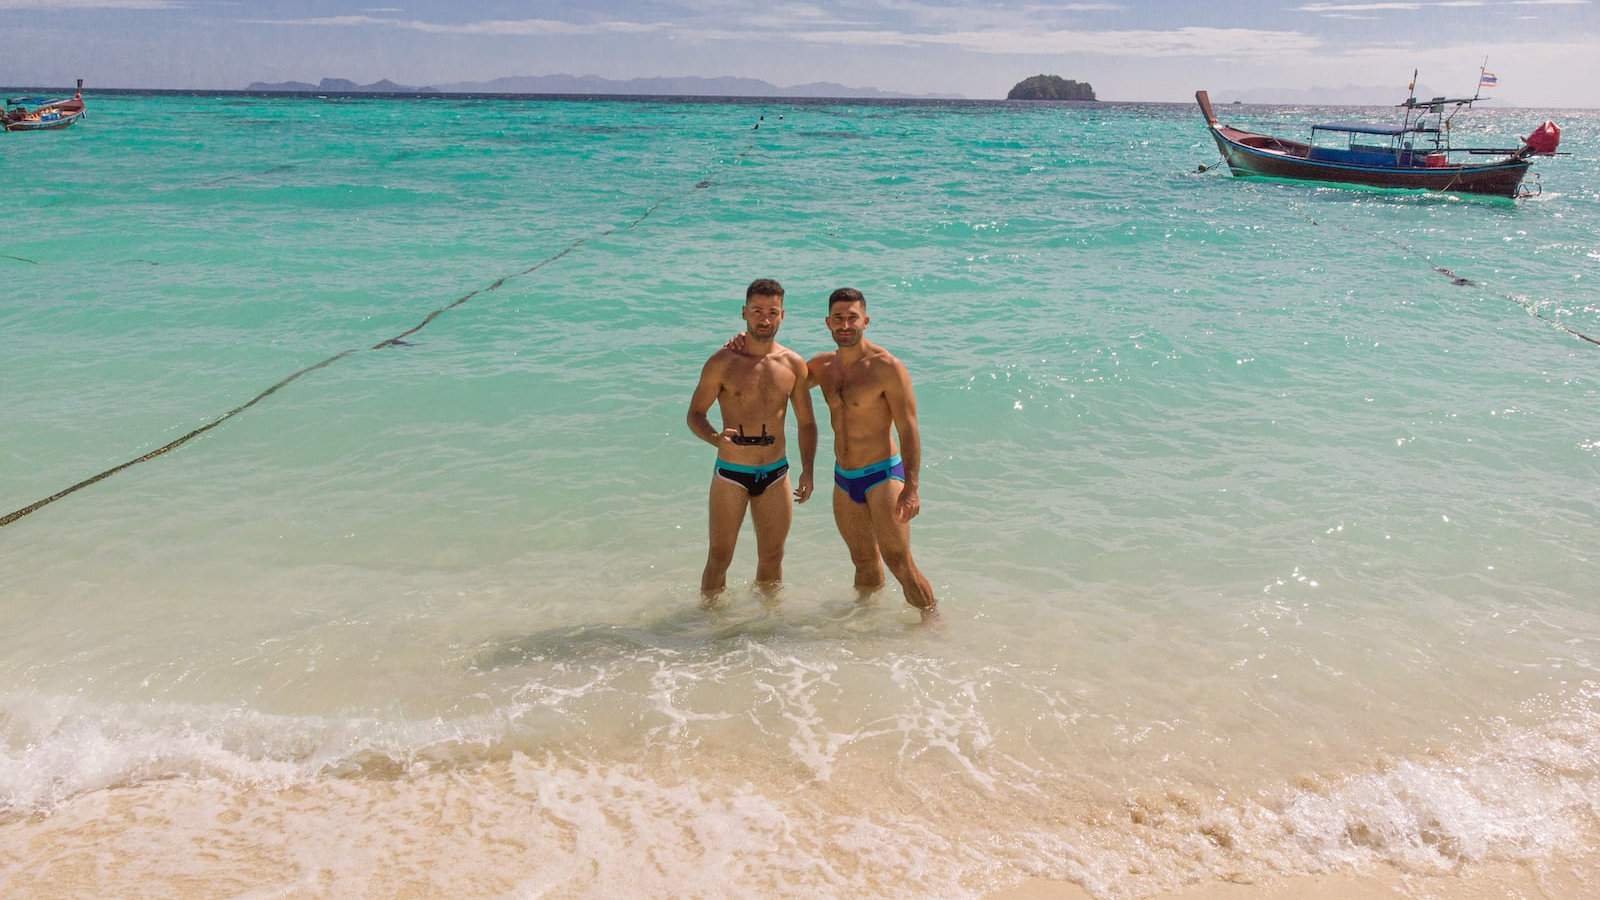 Koh Lipe has some incredible beaches for gay travellers to enjoy